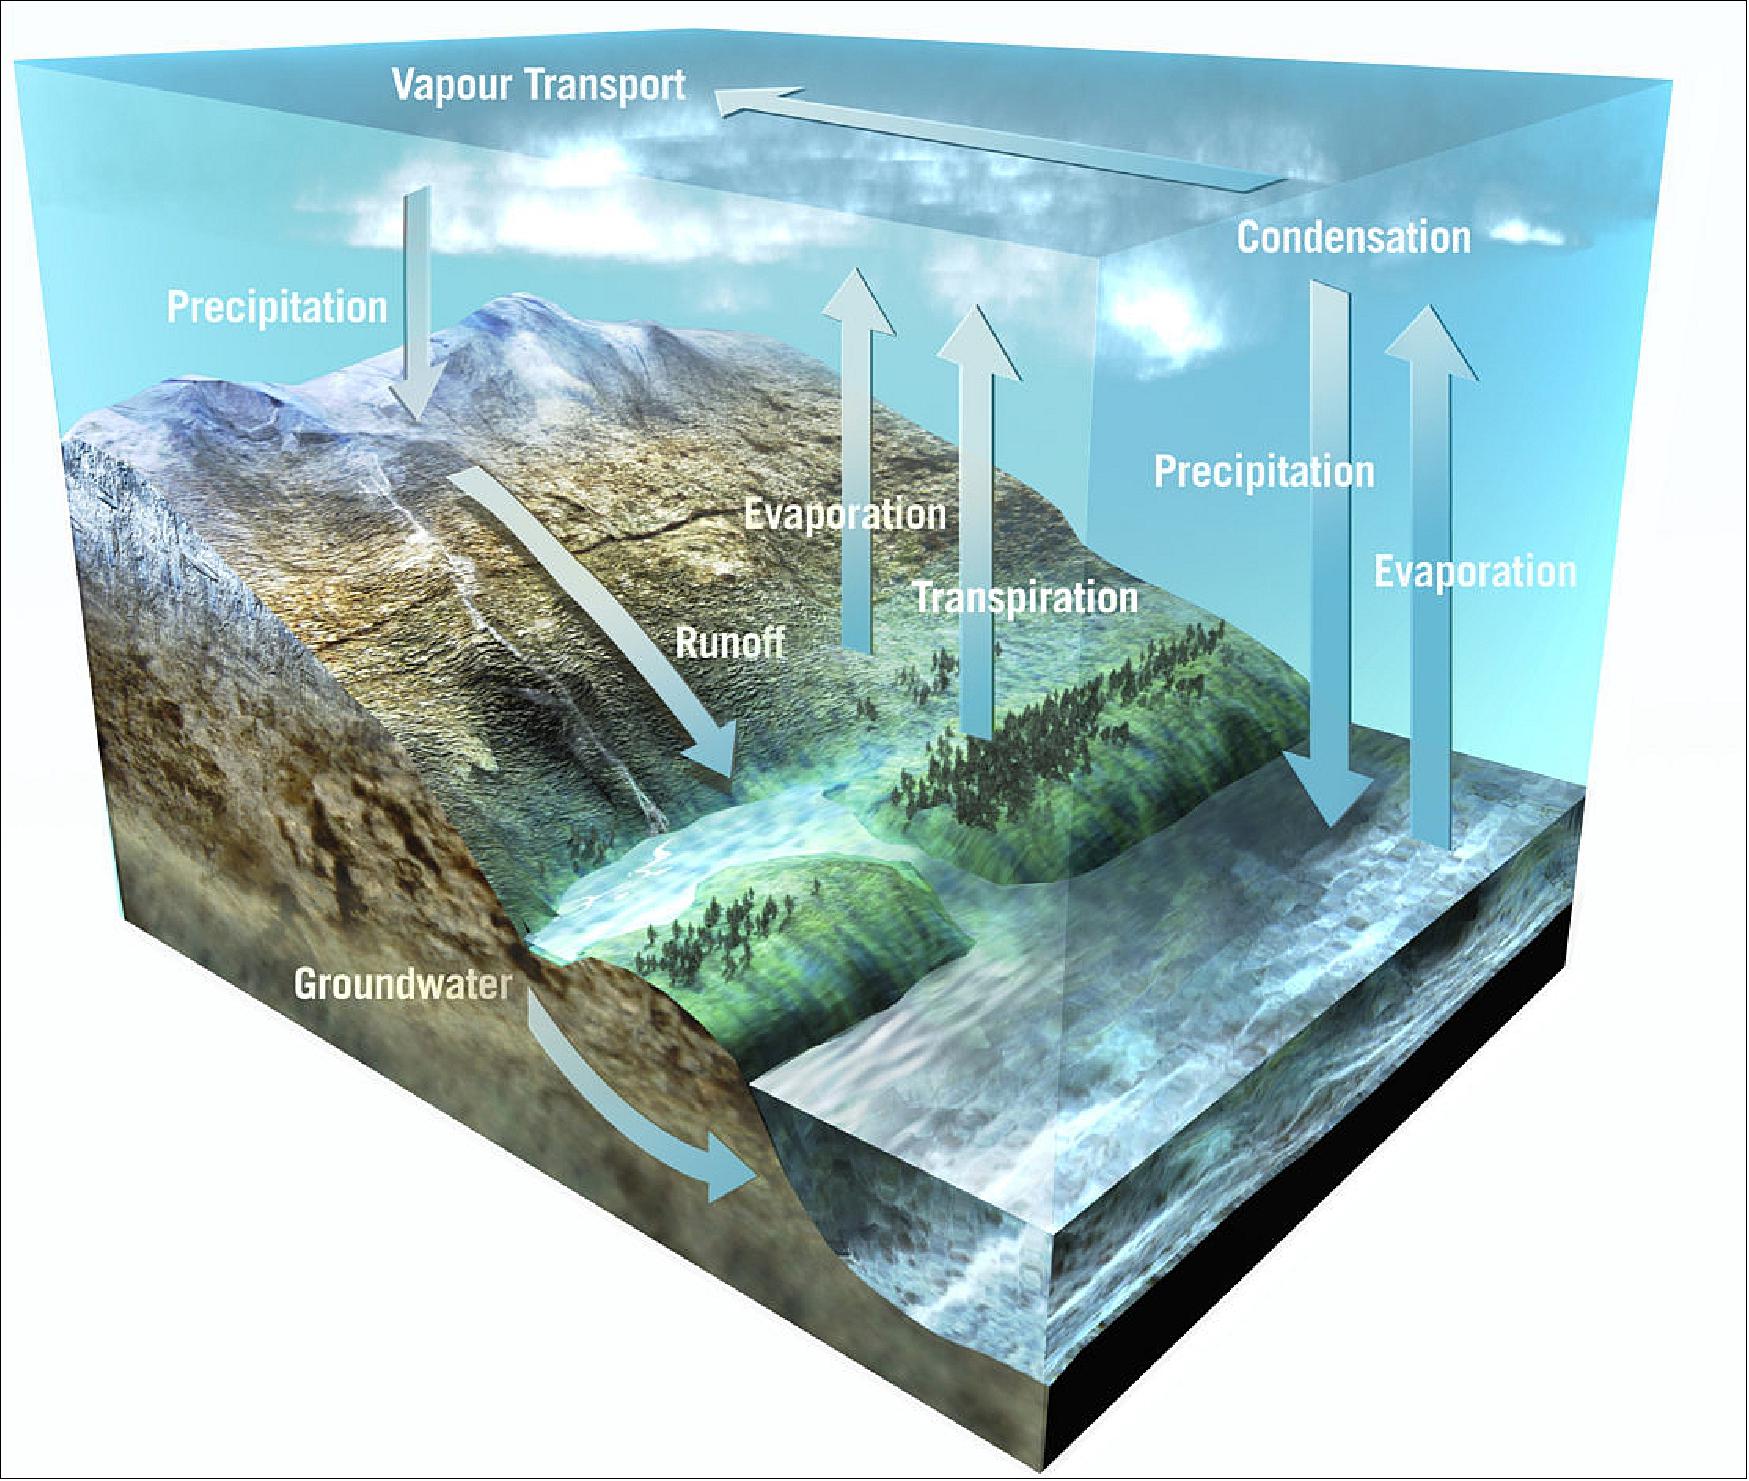 Figure 39: The Earth's water cycle. The total amount of water present on the Earth is fixed and does not change. Powered by the Sun, water is continually being circulated between the oceans, the atmosphere and the land. This circulation and conservation of the Earth's water, known as the water cycle, is a crucial component of our weather and climate (image credit: ESA/AOES Medialab)